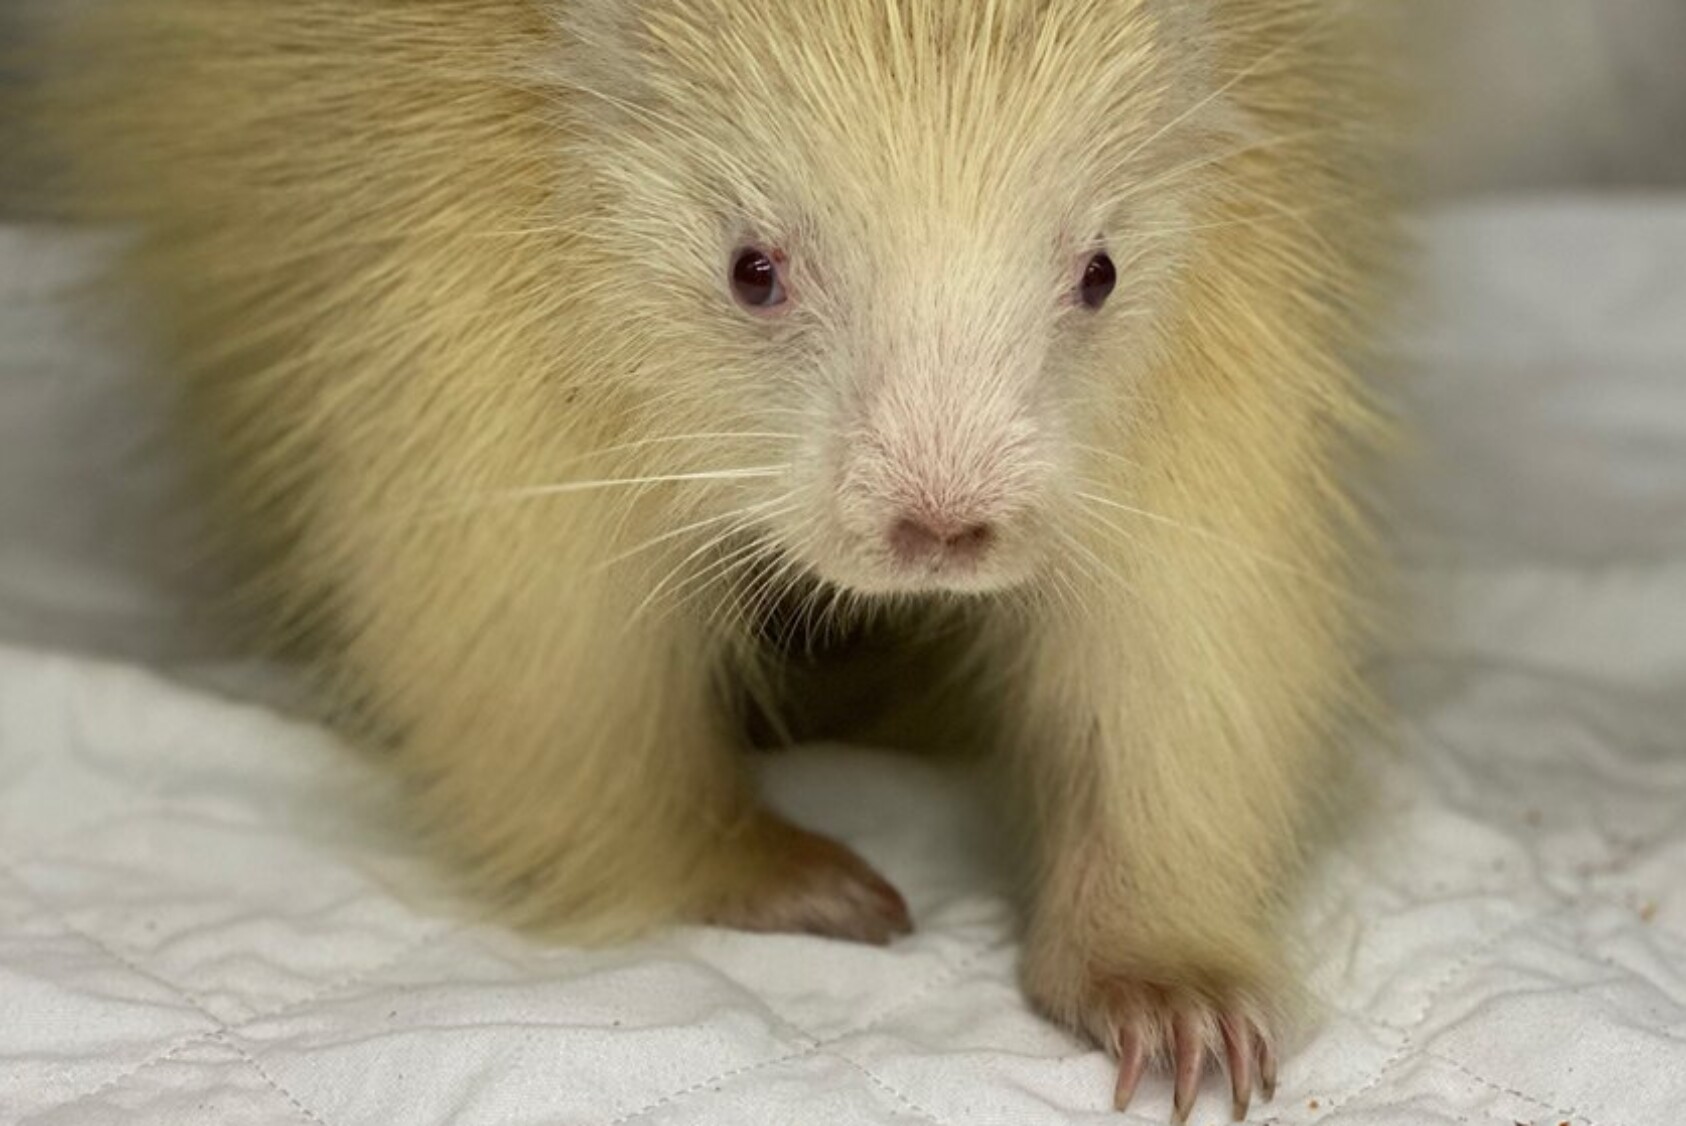 This rare albino porcupine made a full recovery and is now an ambassador for her species and for native wildlife at The Wild Center in Tupper Lake.